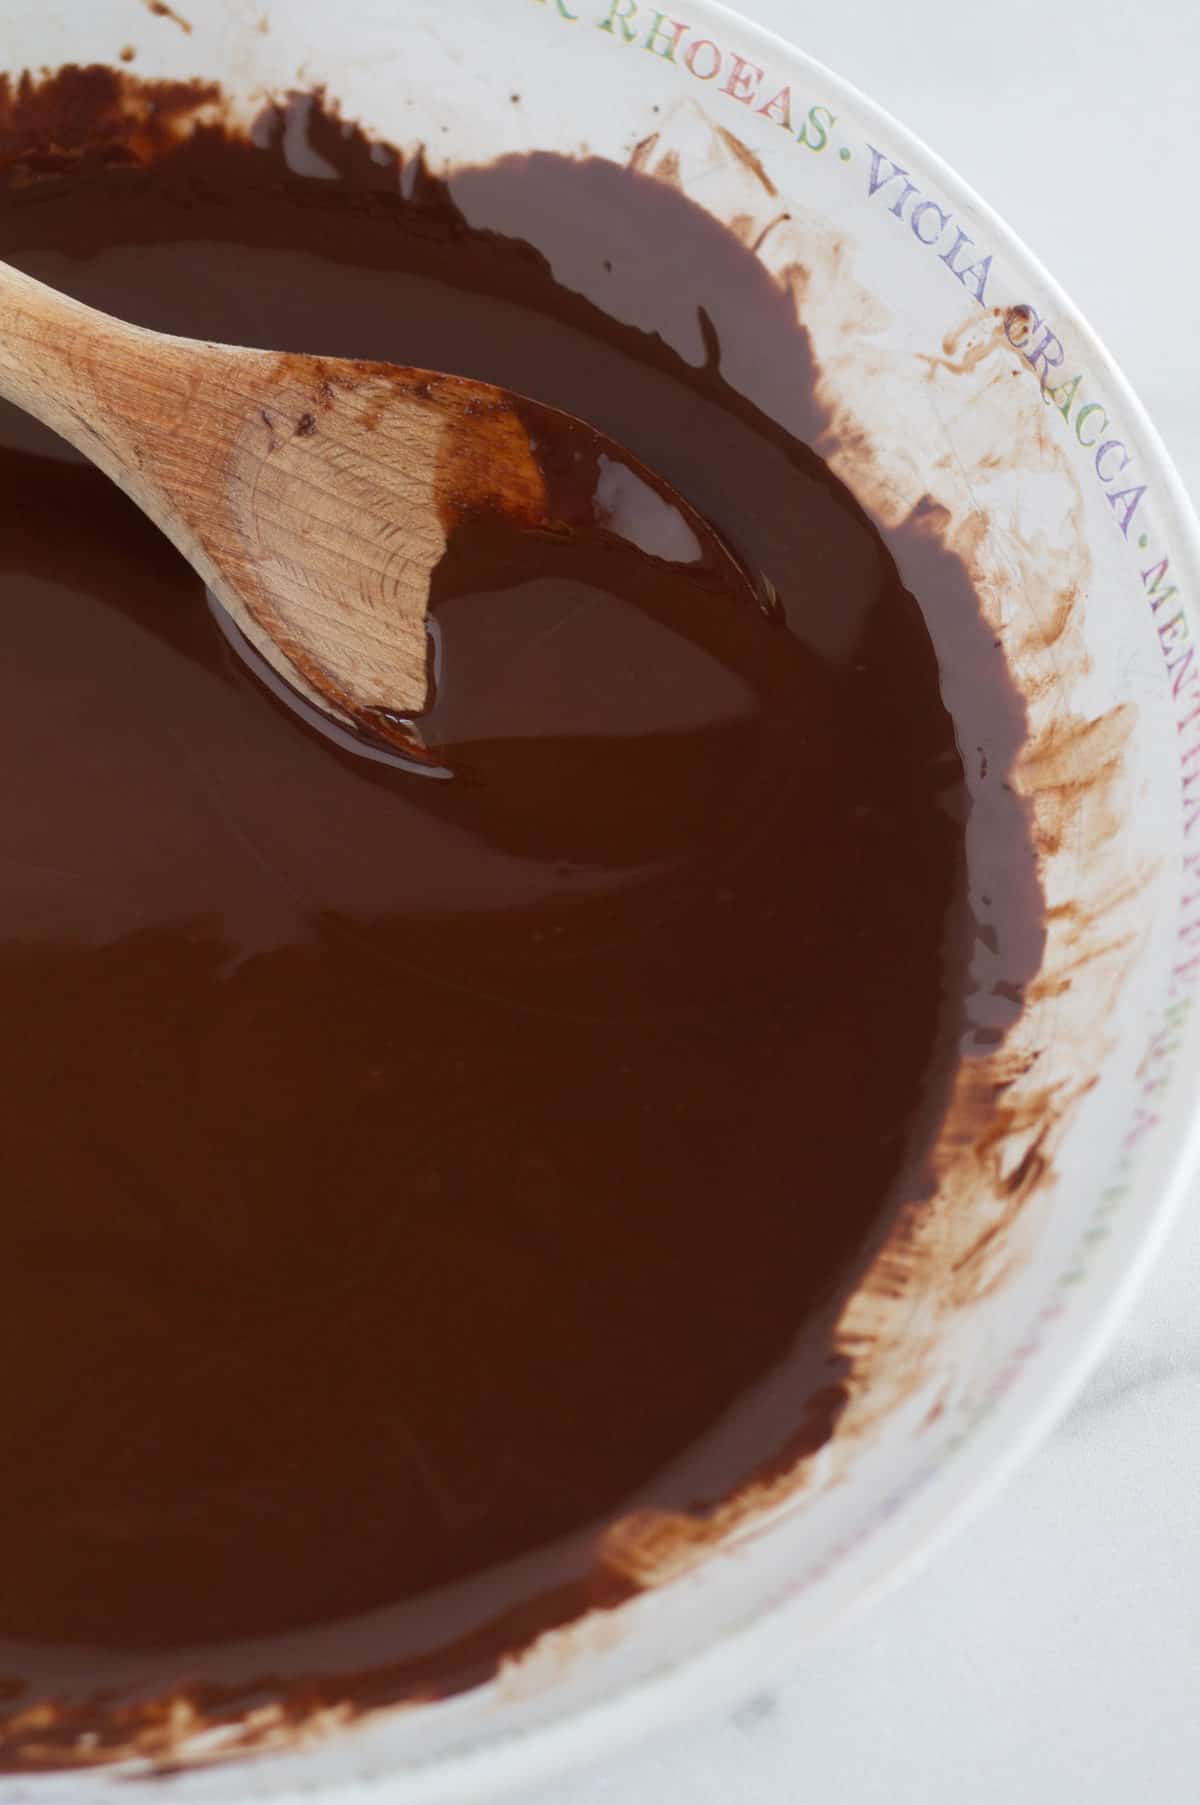 Melted chocolate and coconut oil in large bowl.